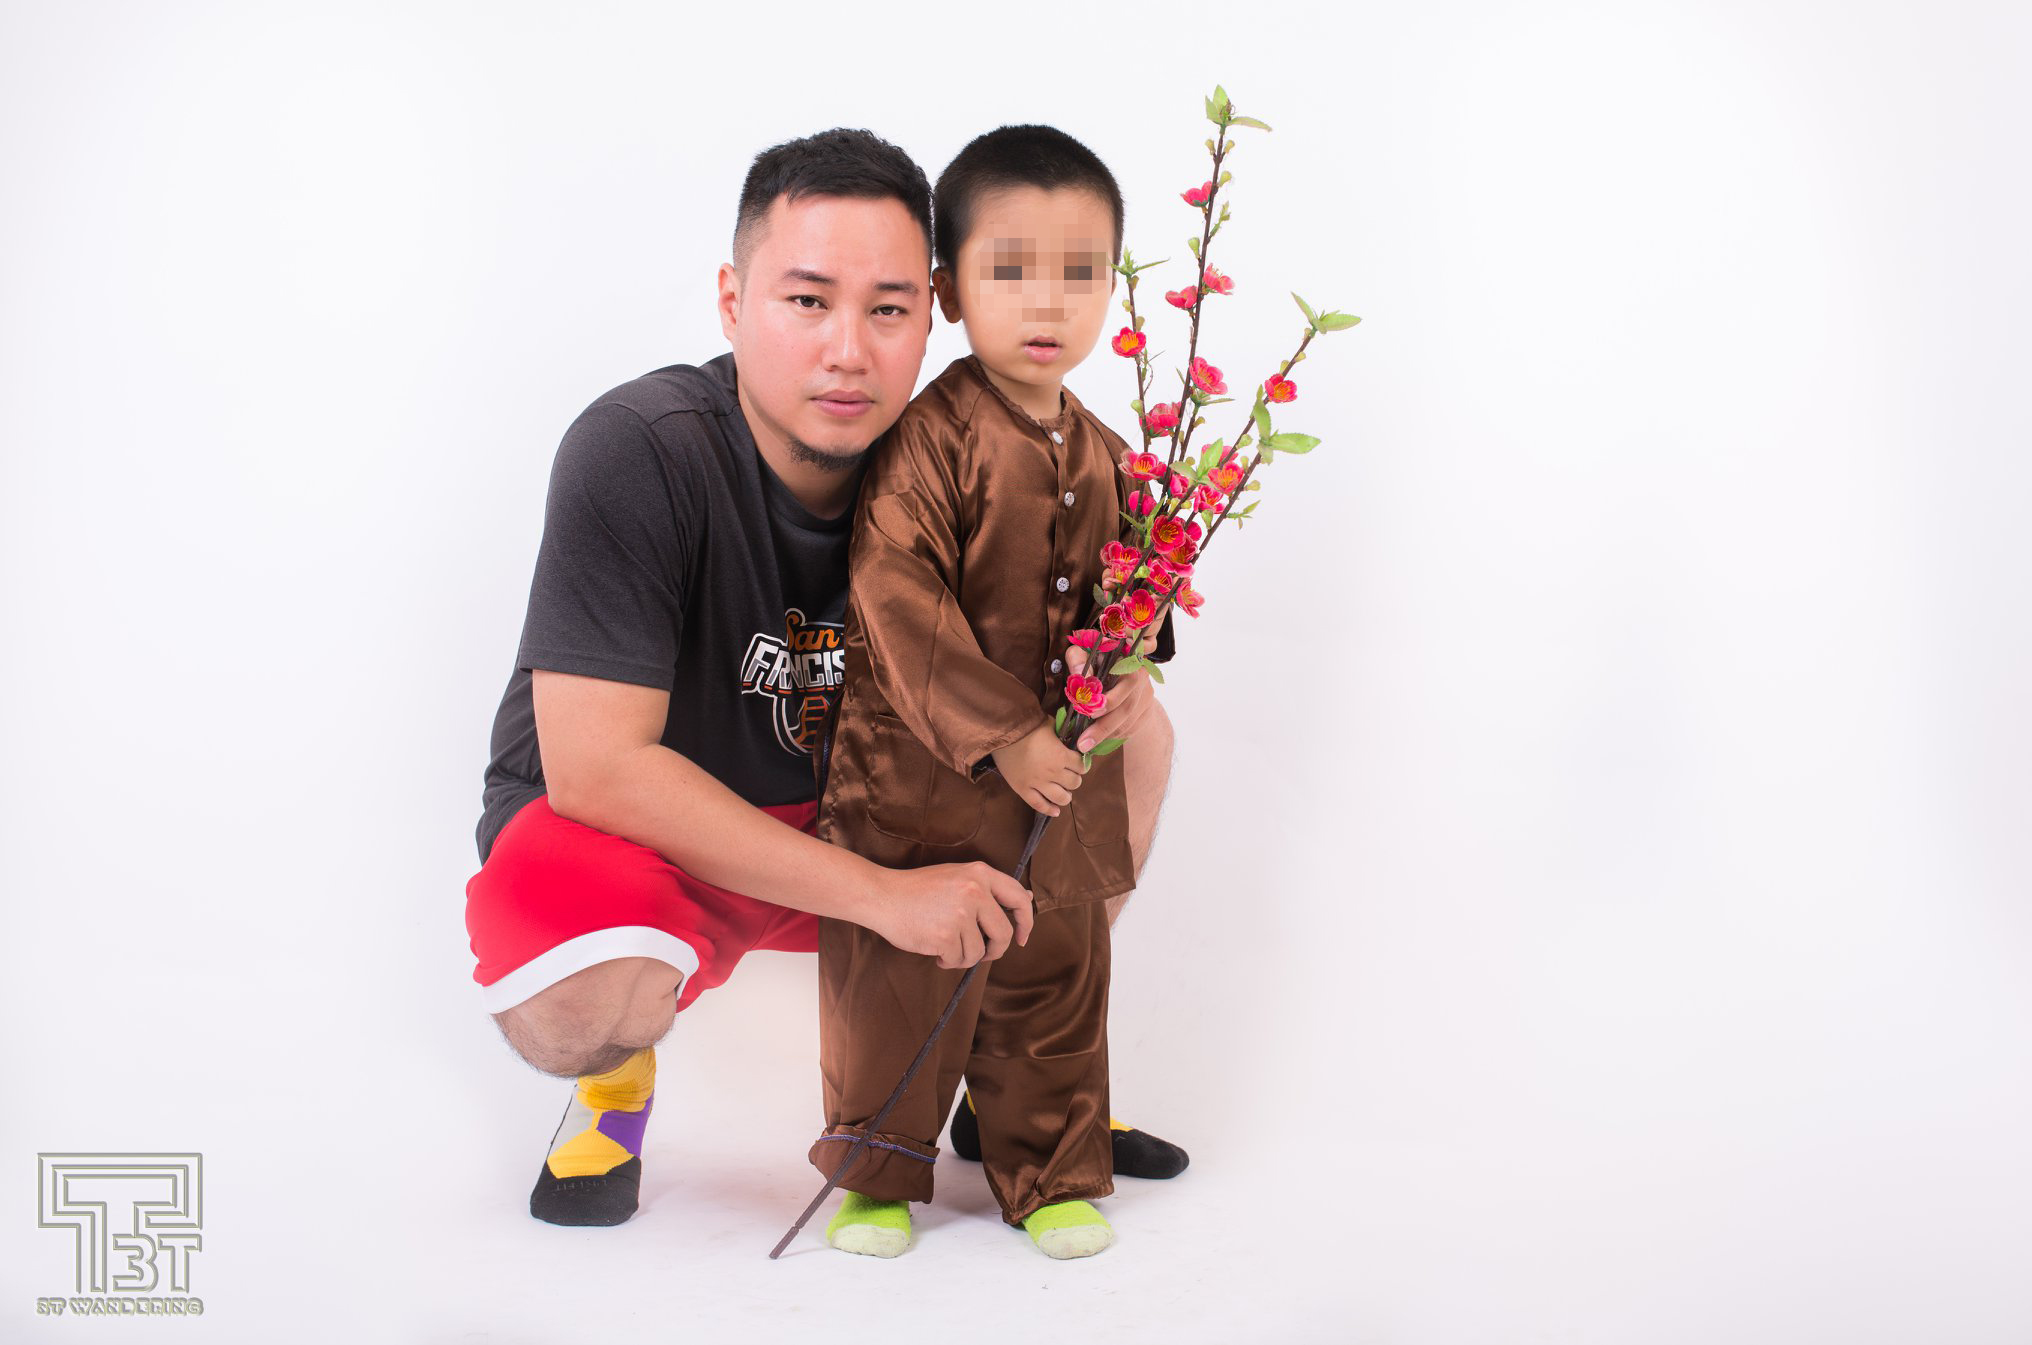 Tuan and an autistic child posing for a souvenir photo 